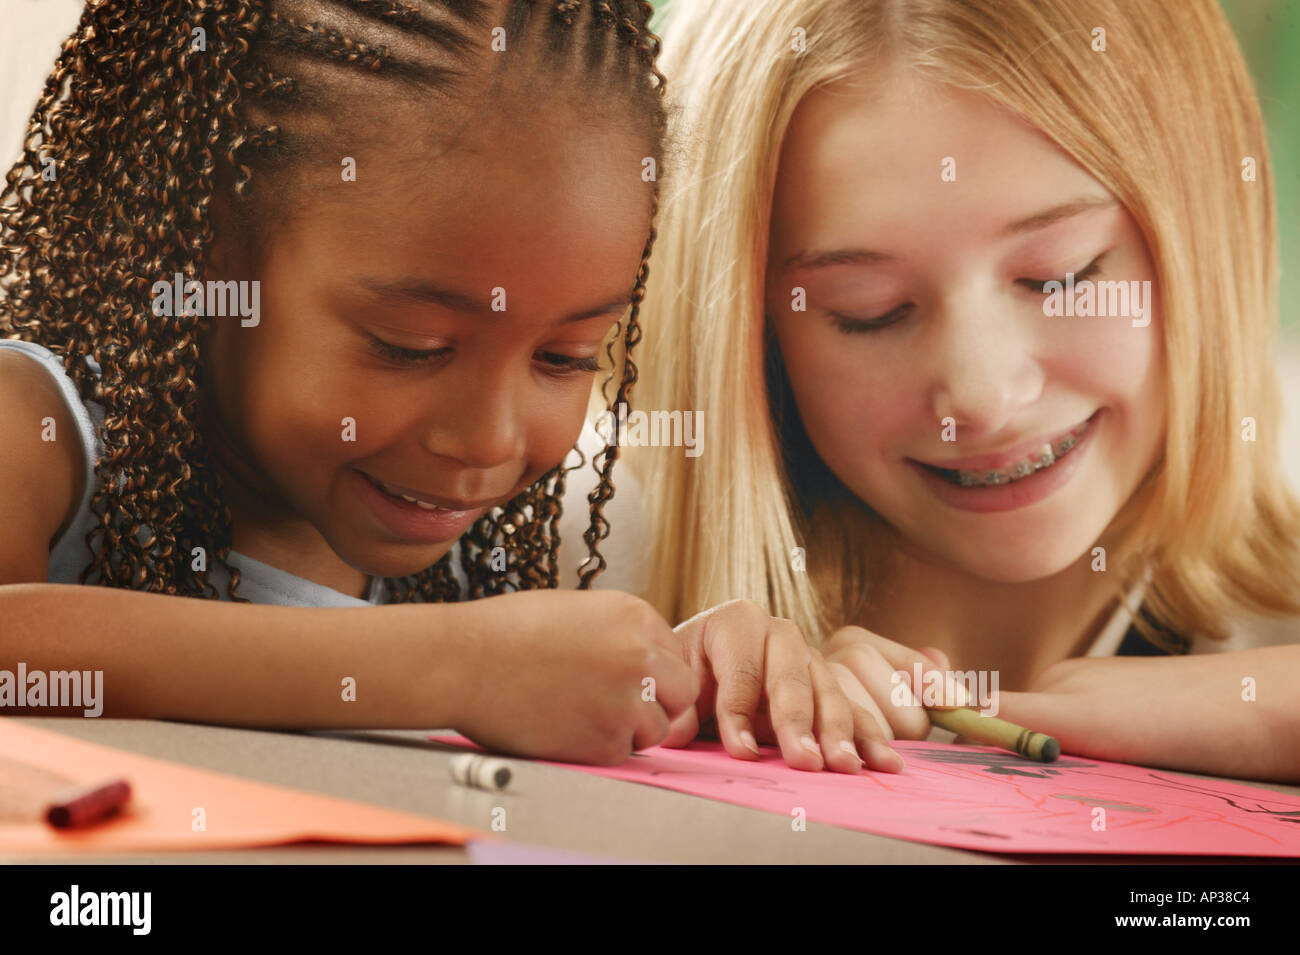 Girls color together Stock Photo